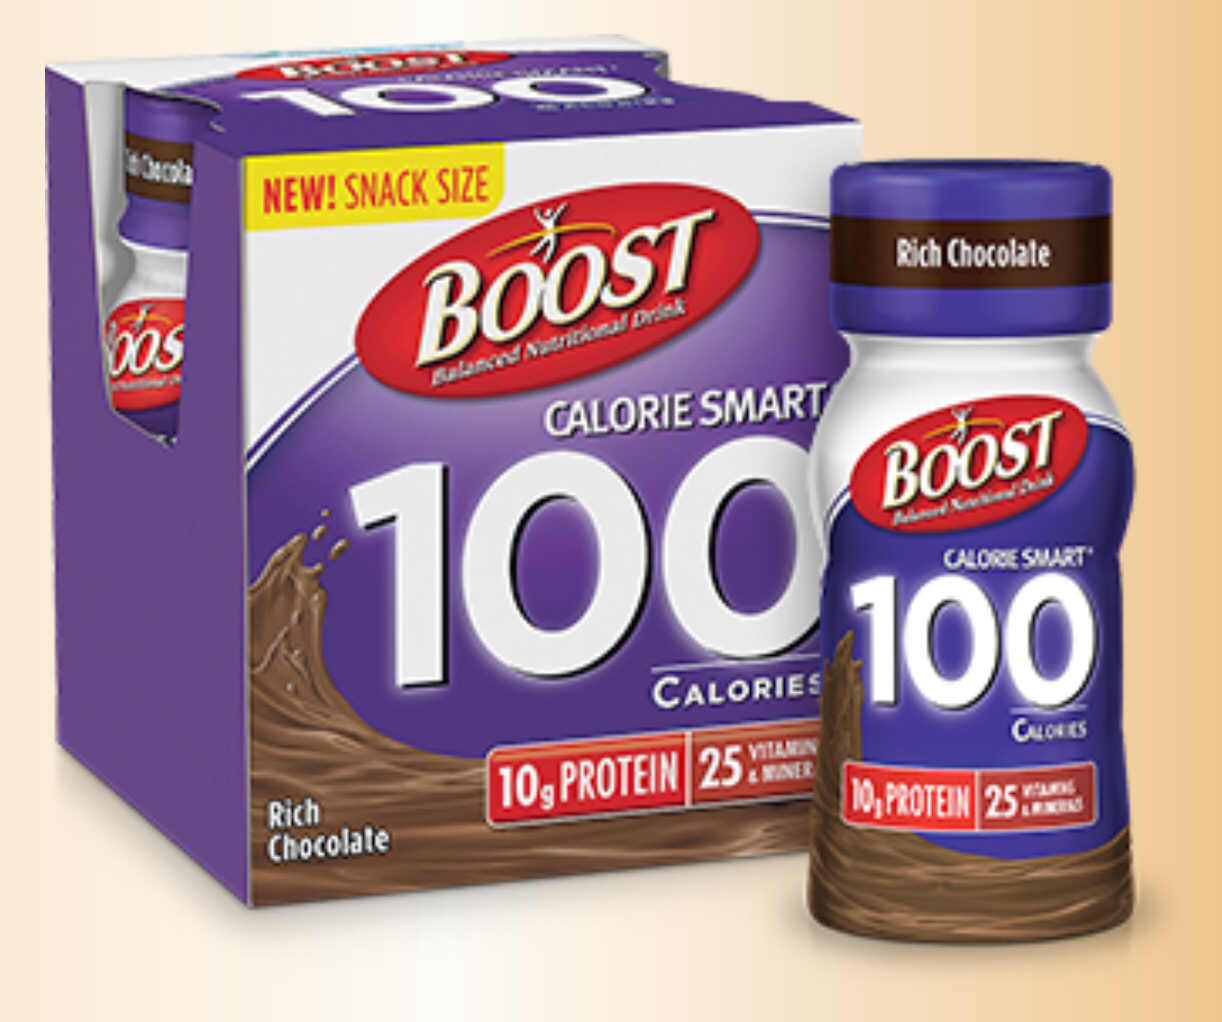 Get a FREE 4-Pack of Boost Calorie Smart 100 Calories Nutritional Drink!